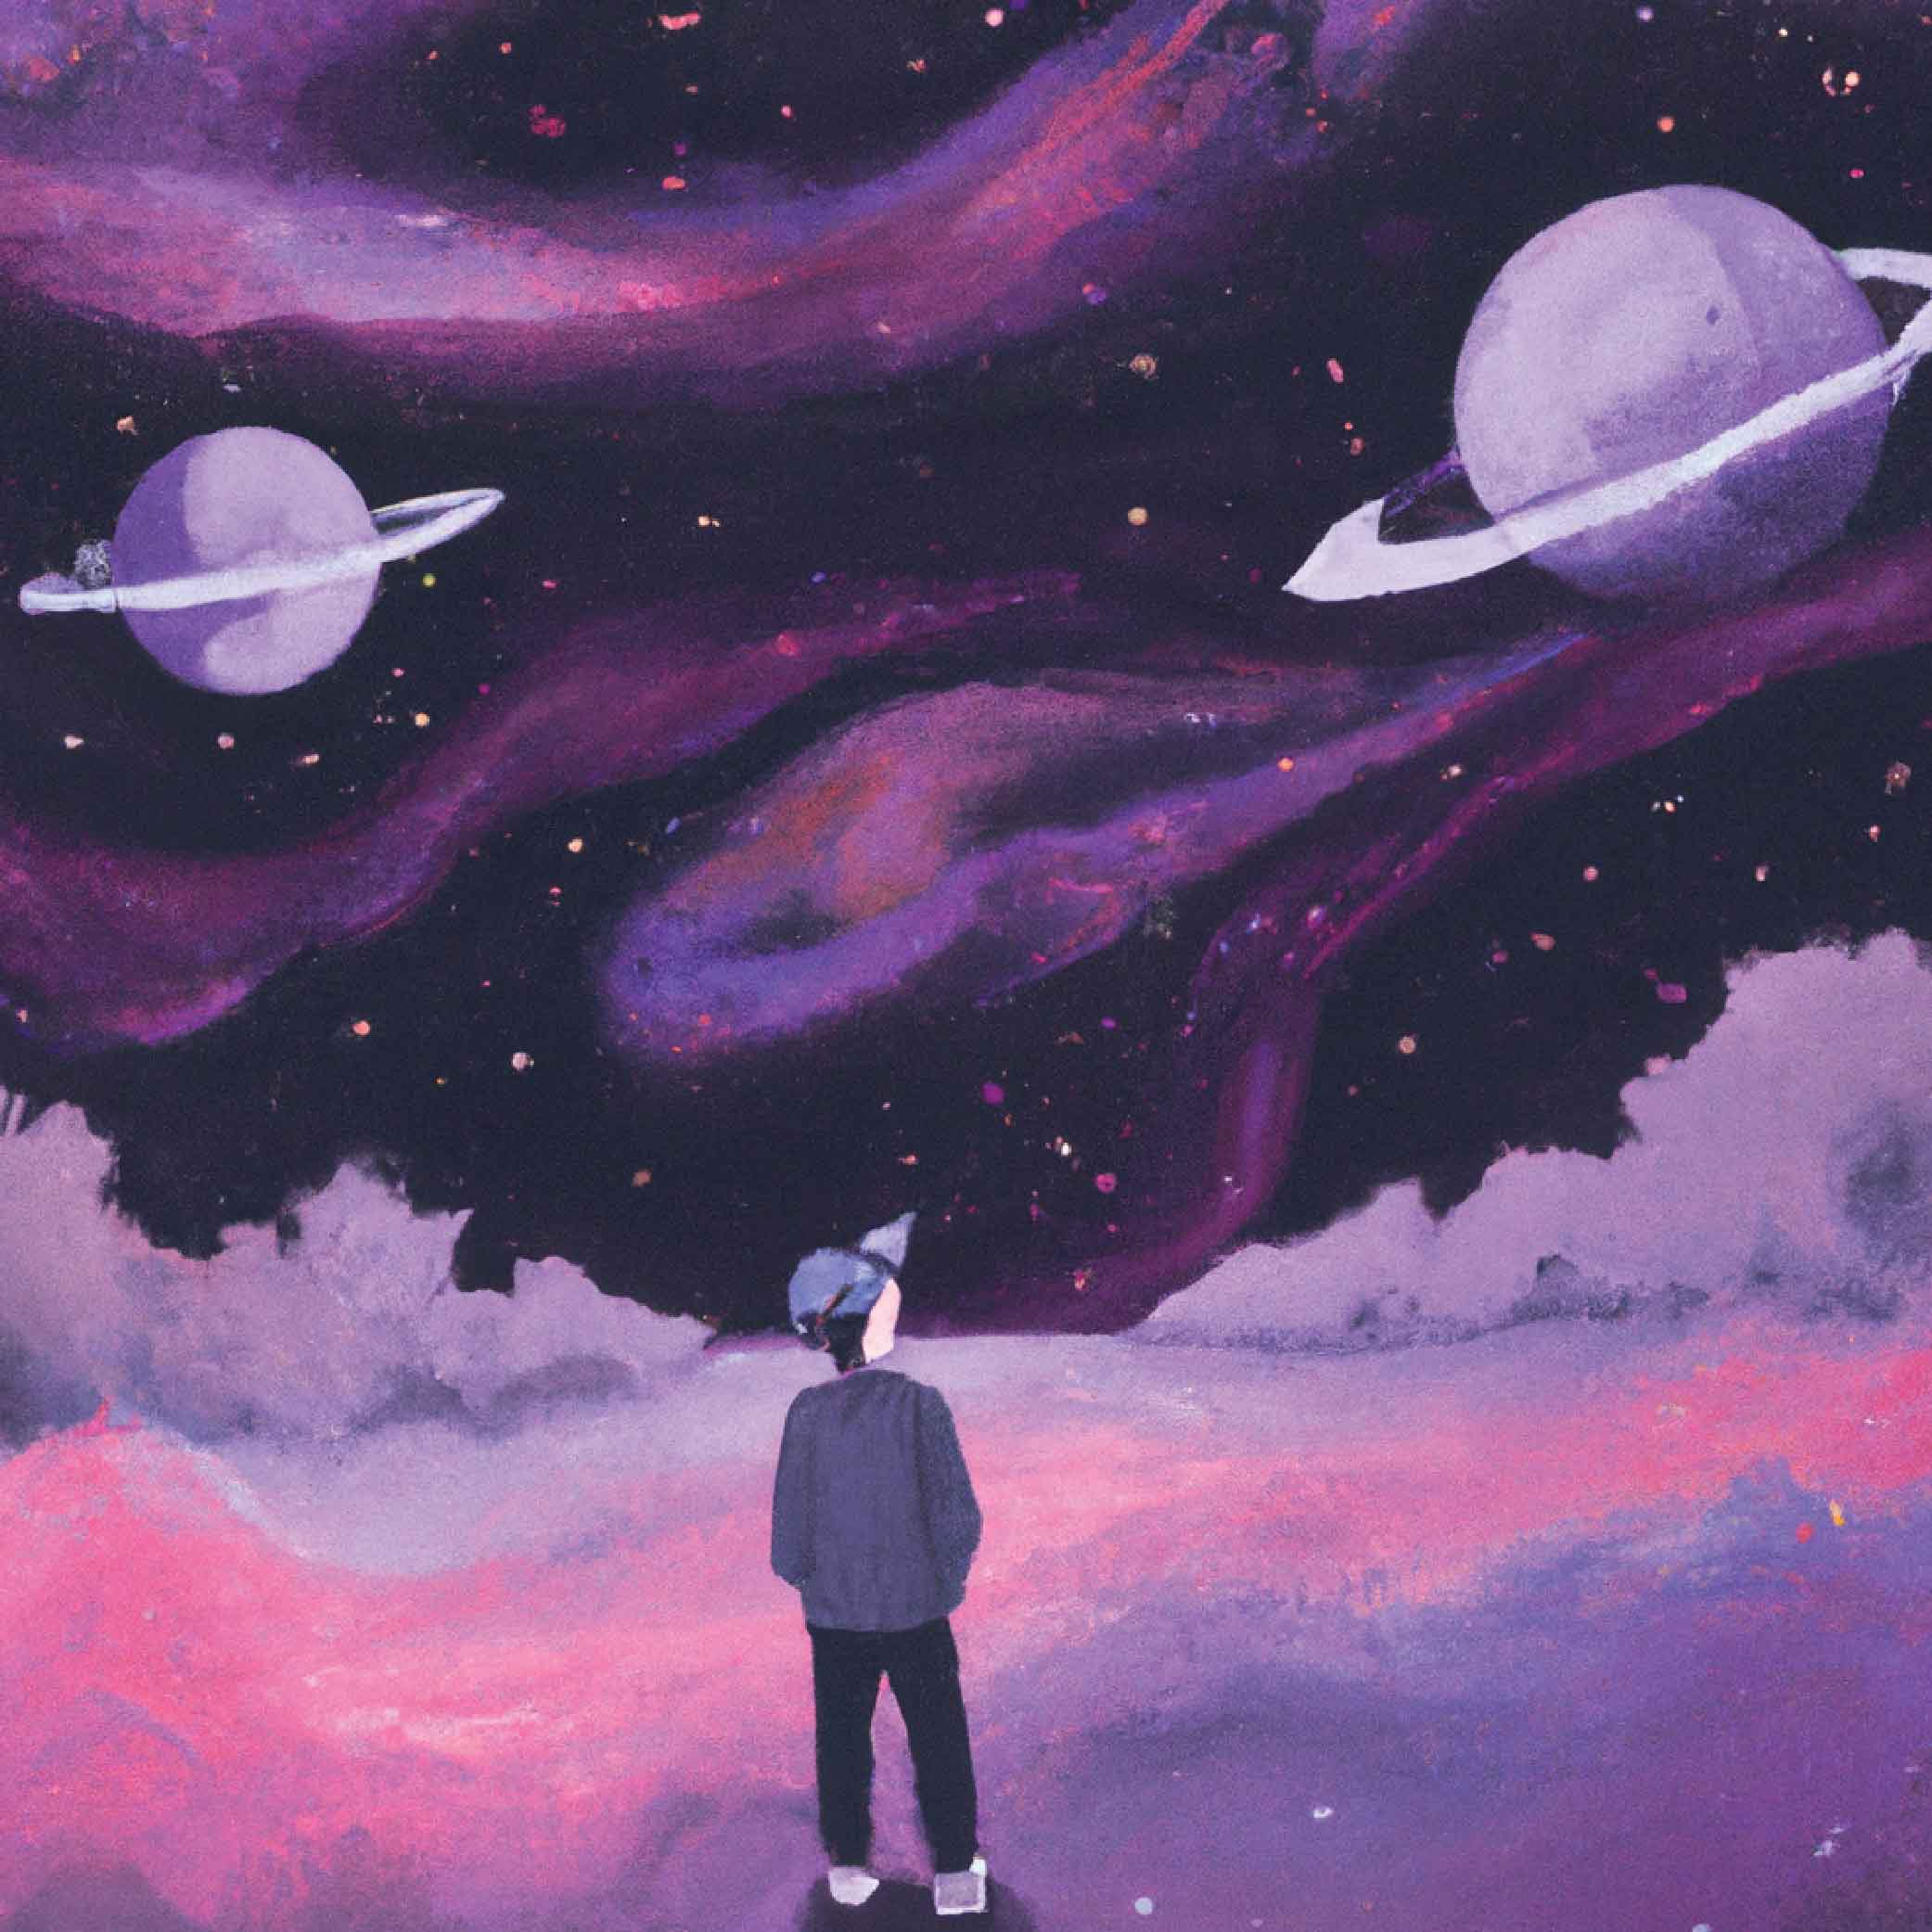 A man standing in space looking at the purplish universe skies and the planets.